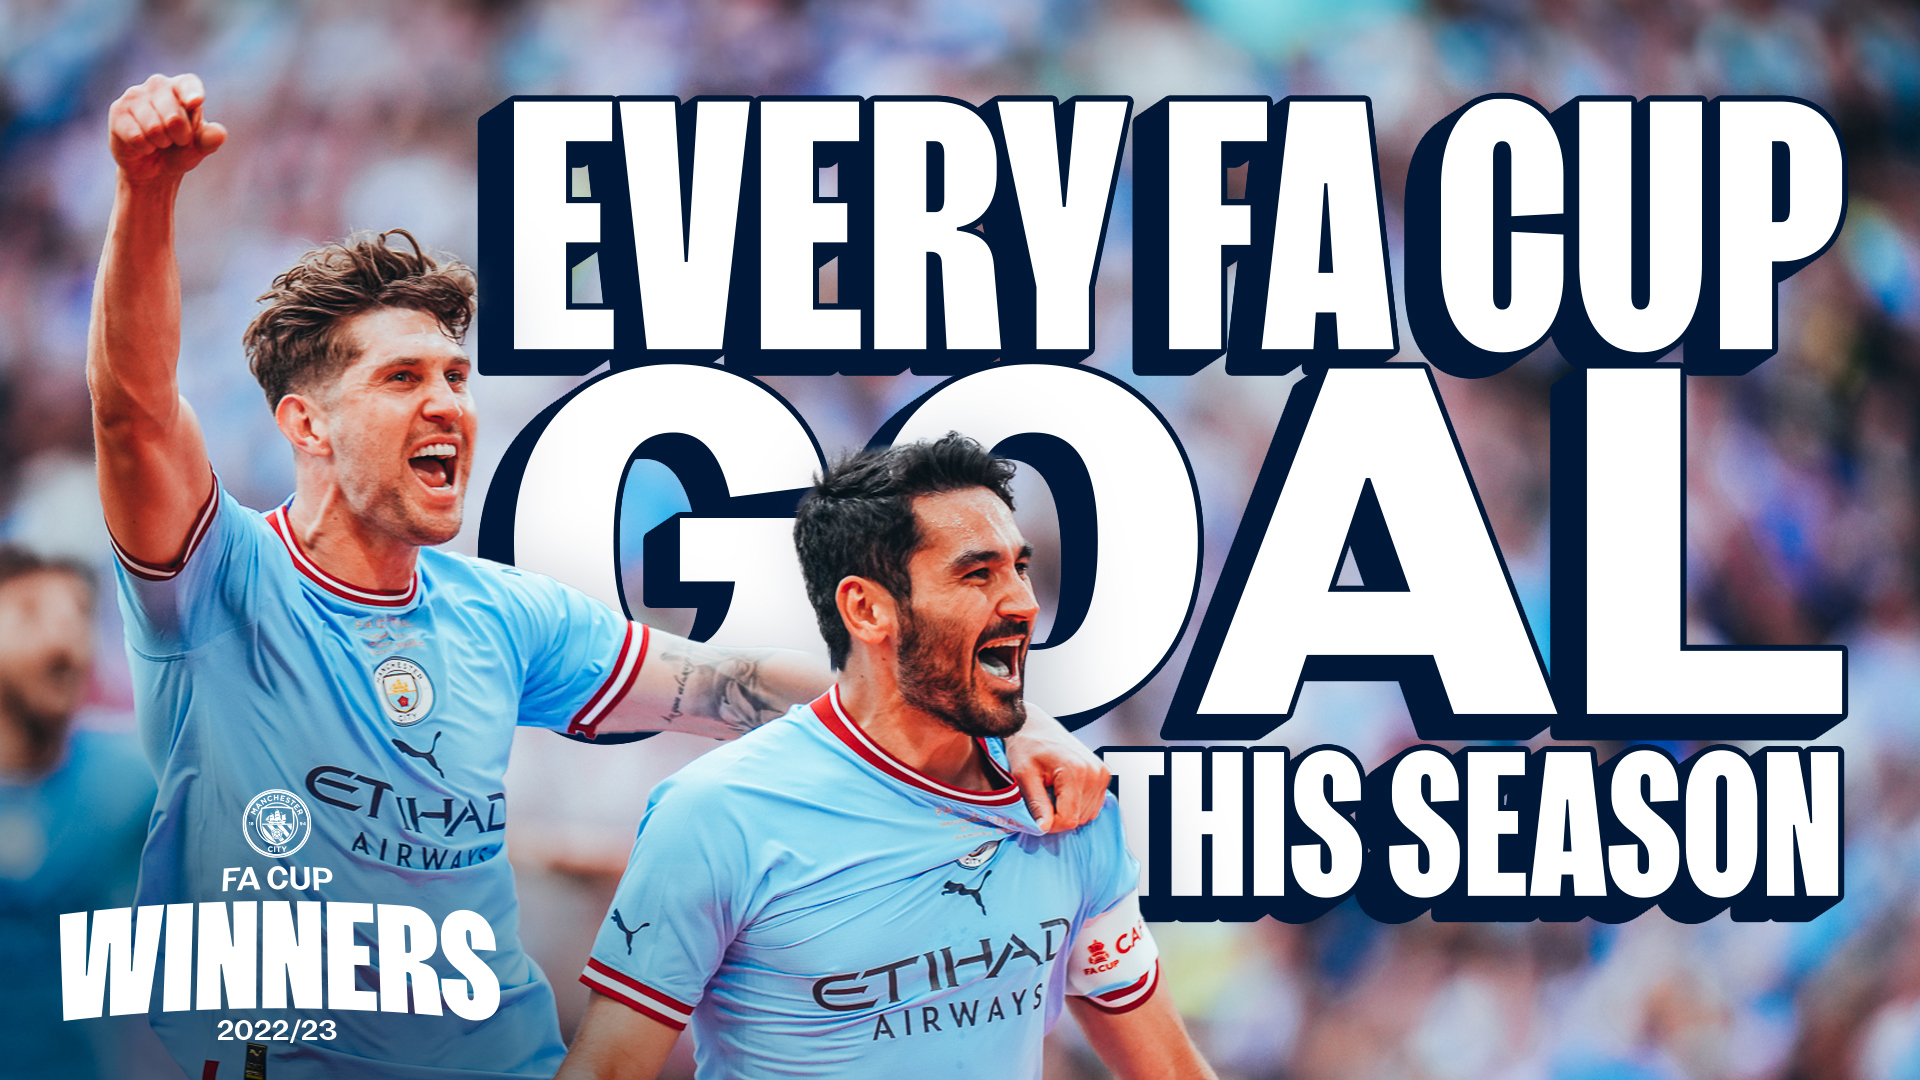 Watch every City goal in the FA Cup this season